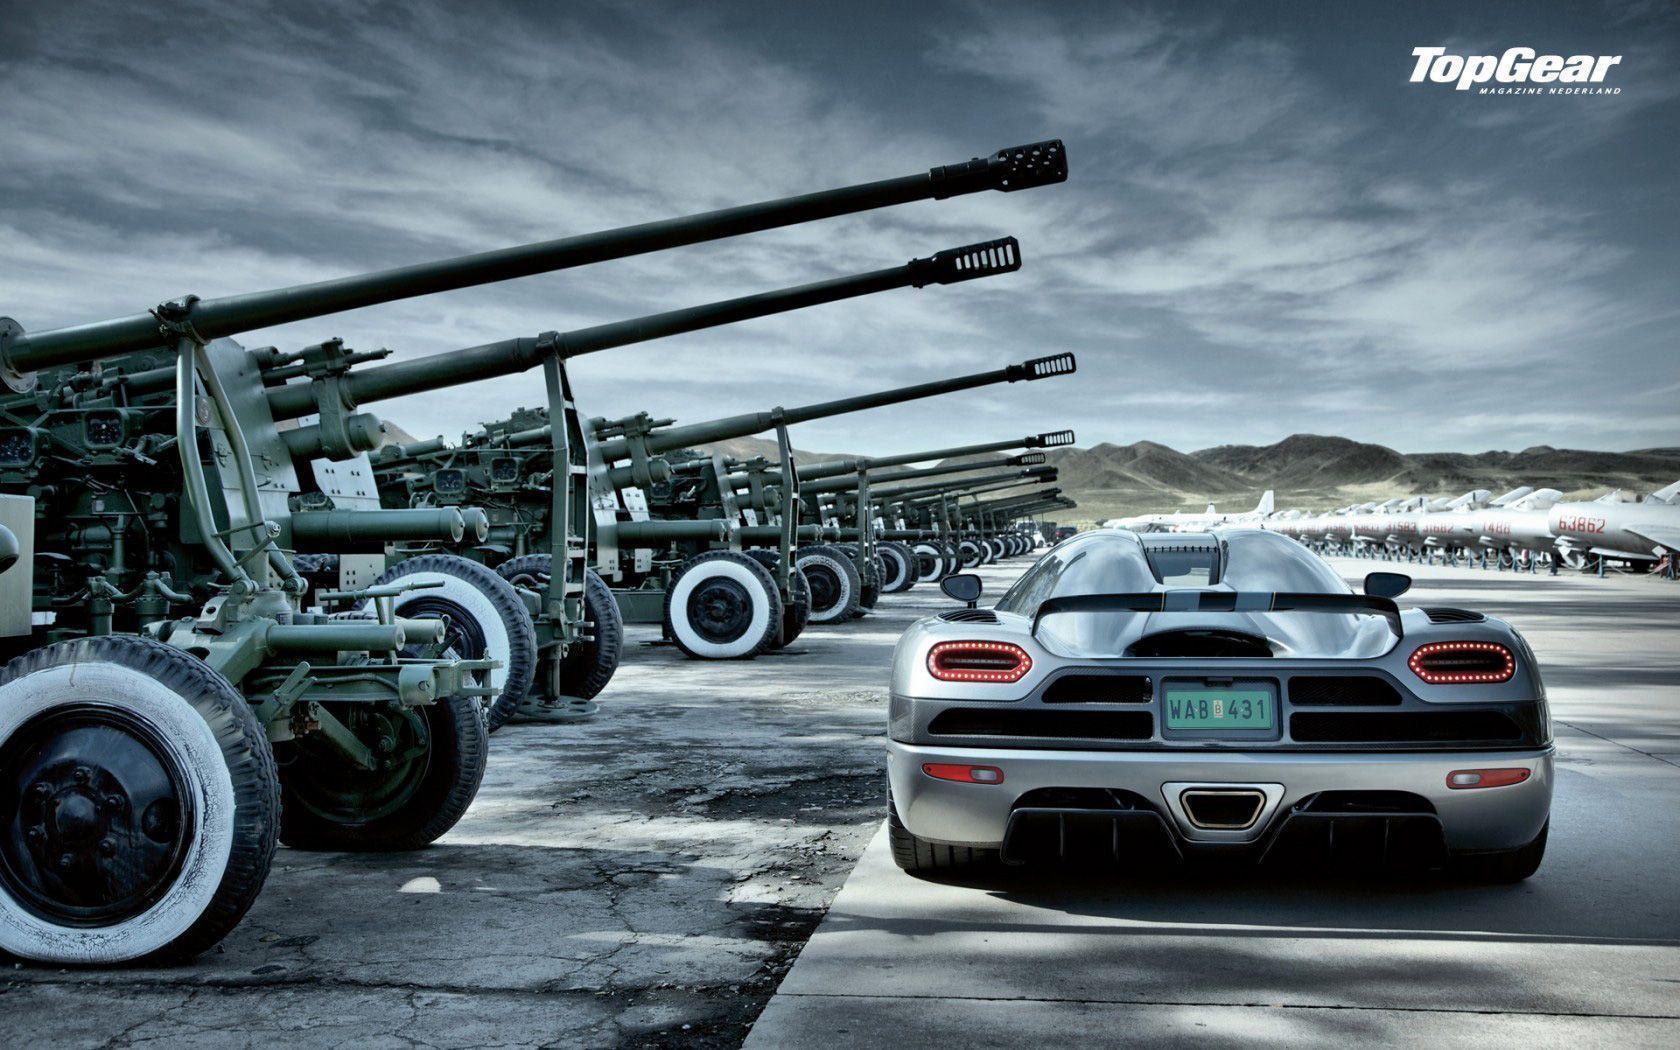 image about Koenigsegg. Cars, Turismo and Boss